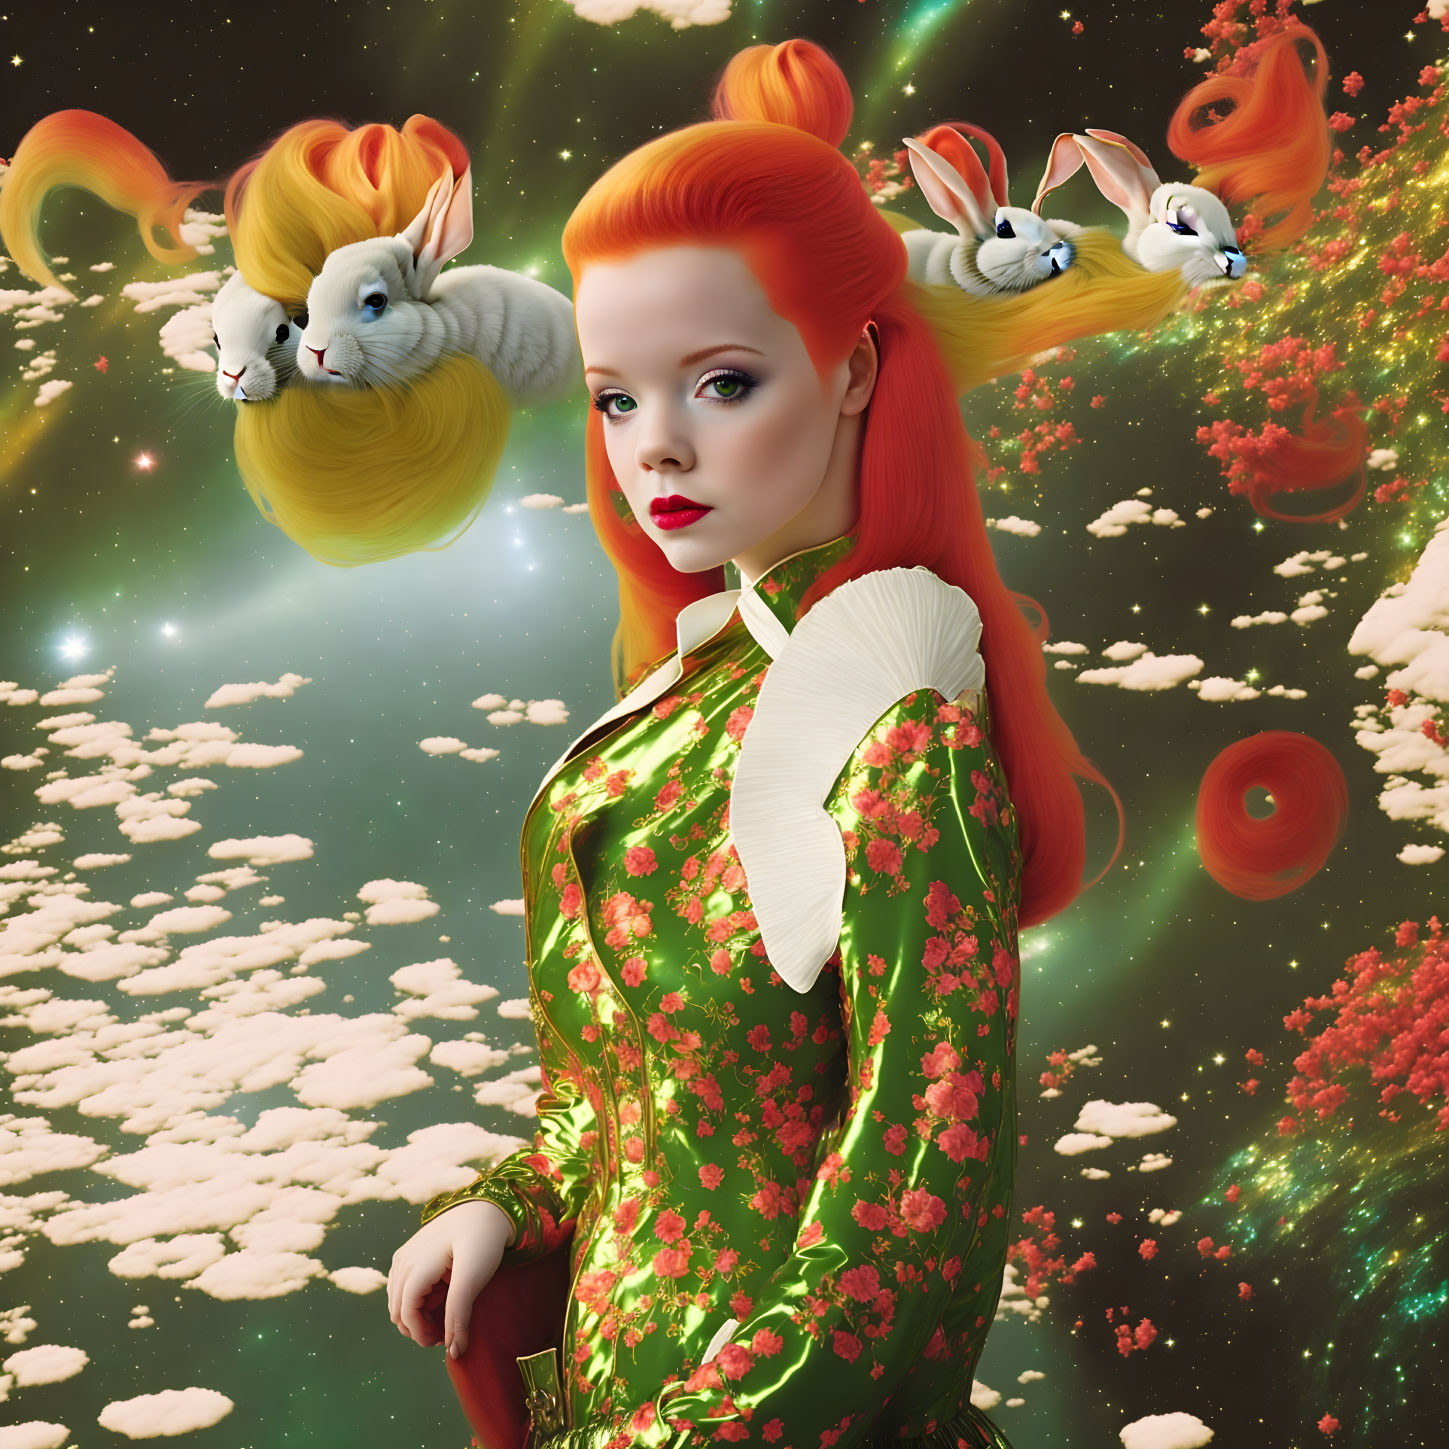 Surreal portrait: Woman with red hair in floral kimono, surrounded by flying squirrels in